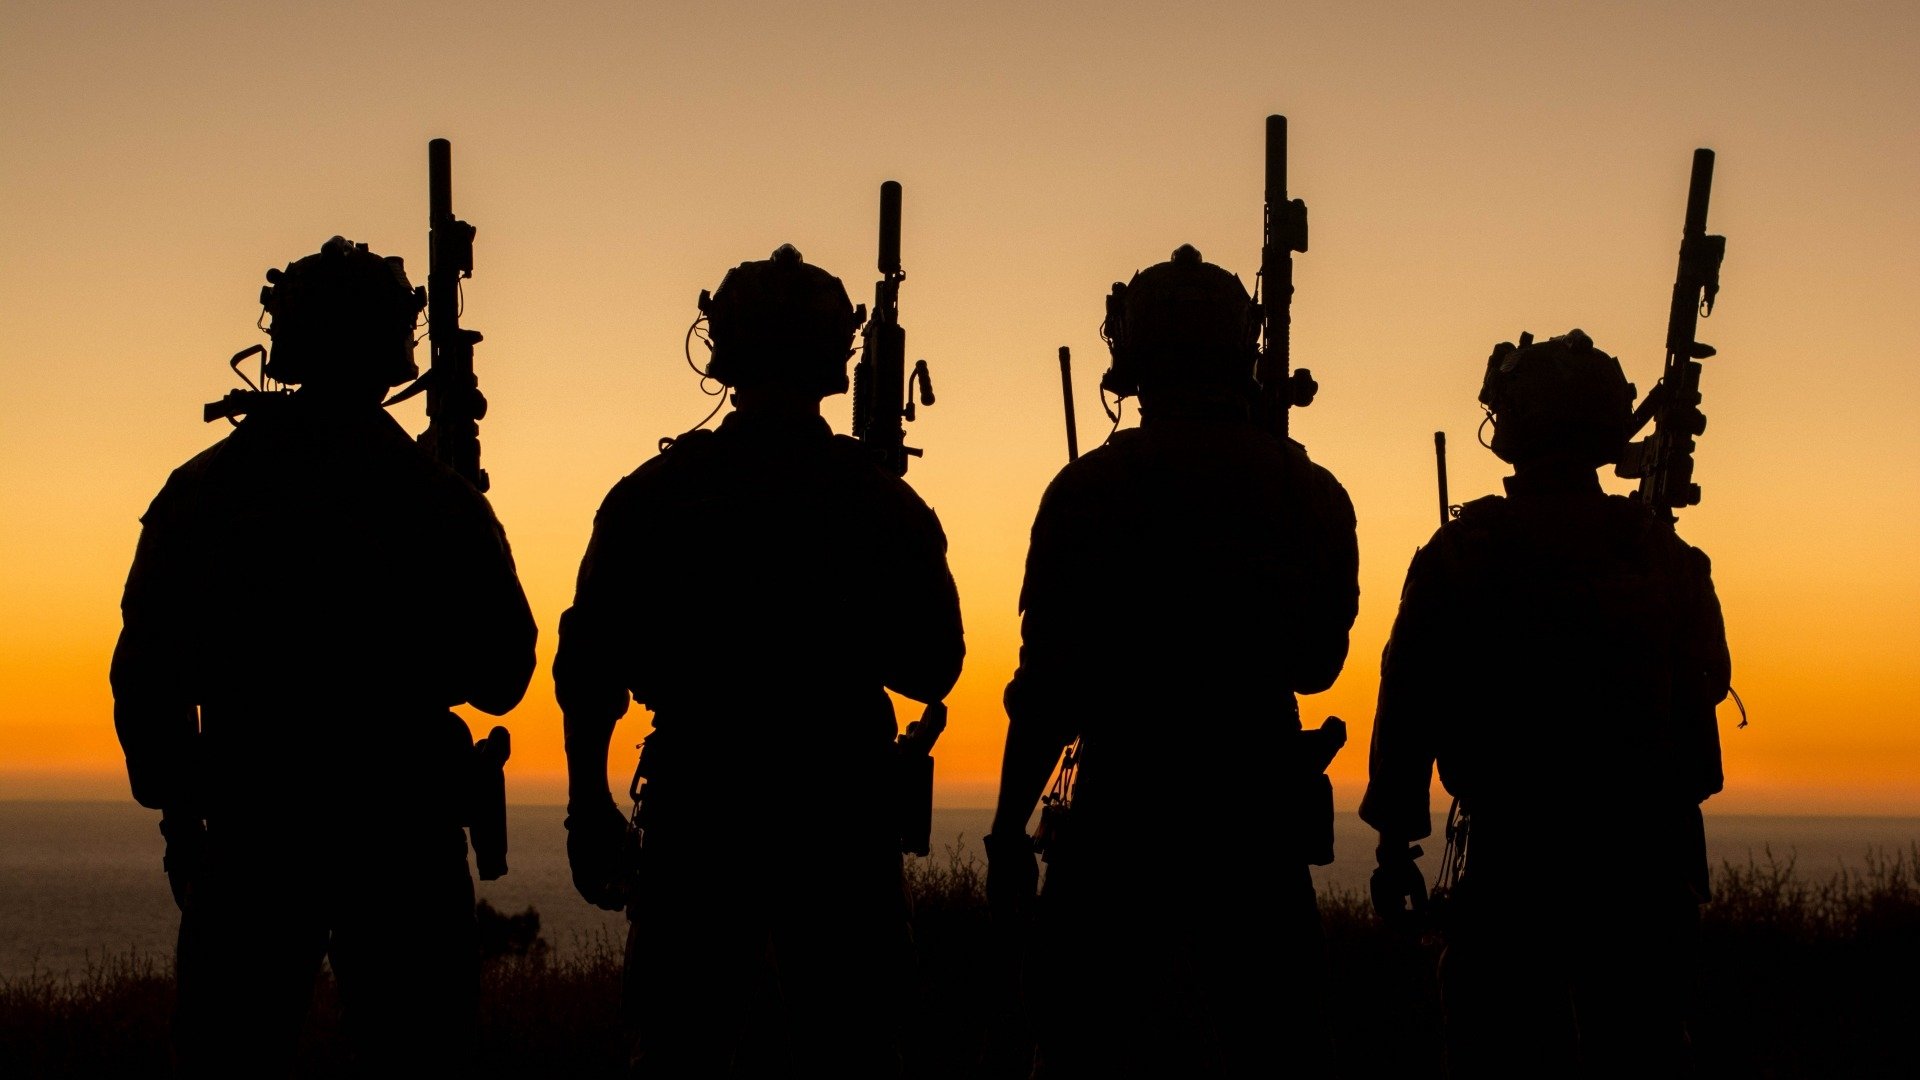 Soldiers Watching The Sunset HD Wallpaper Background Image